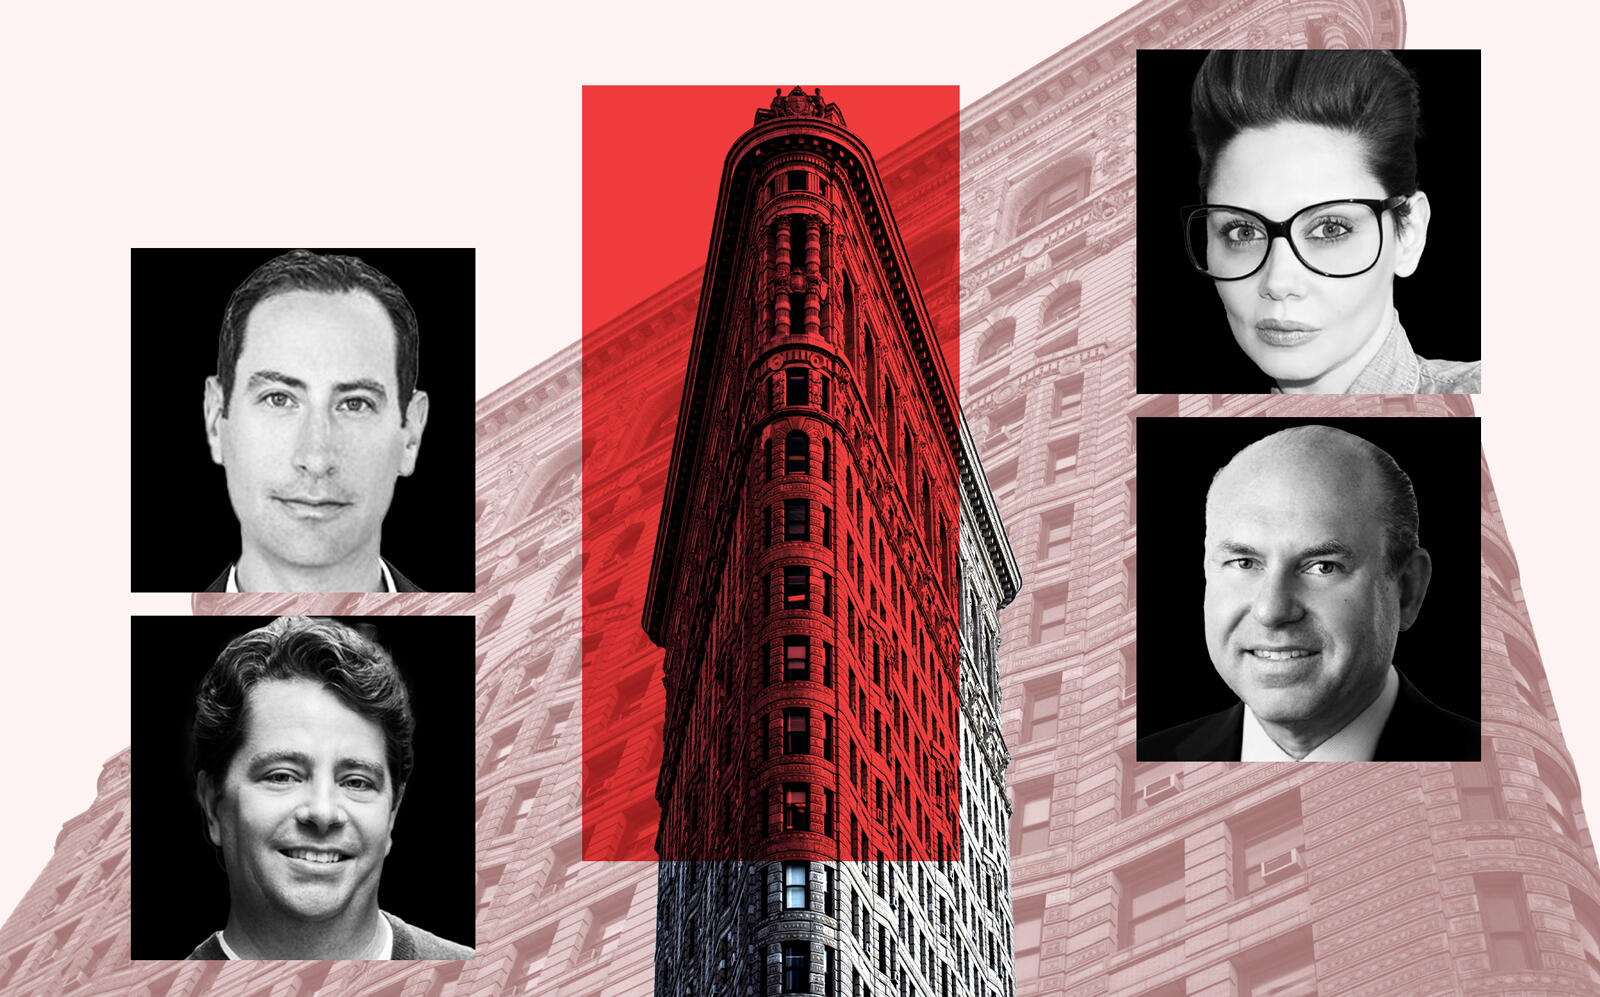 Clockwise from bottom left: GFP Real Estate co-CEOs Eric Gural and Brian Steinwurtzel, Sorgente Group president Veronica Mainetti and ABS President Gregg Schenker with the Flatiron Building (GFP, Sorgente, ABS, iStock)